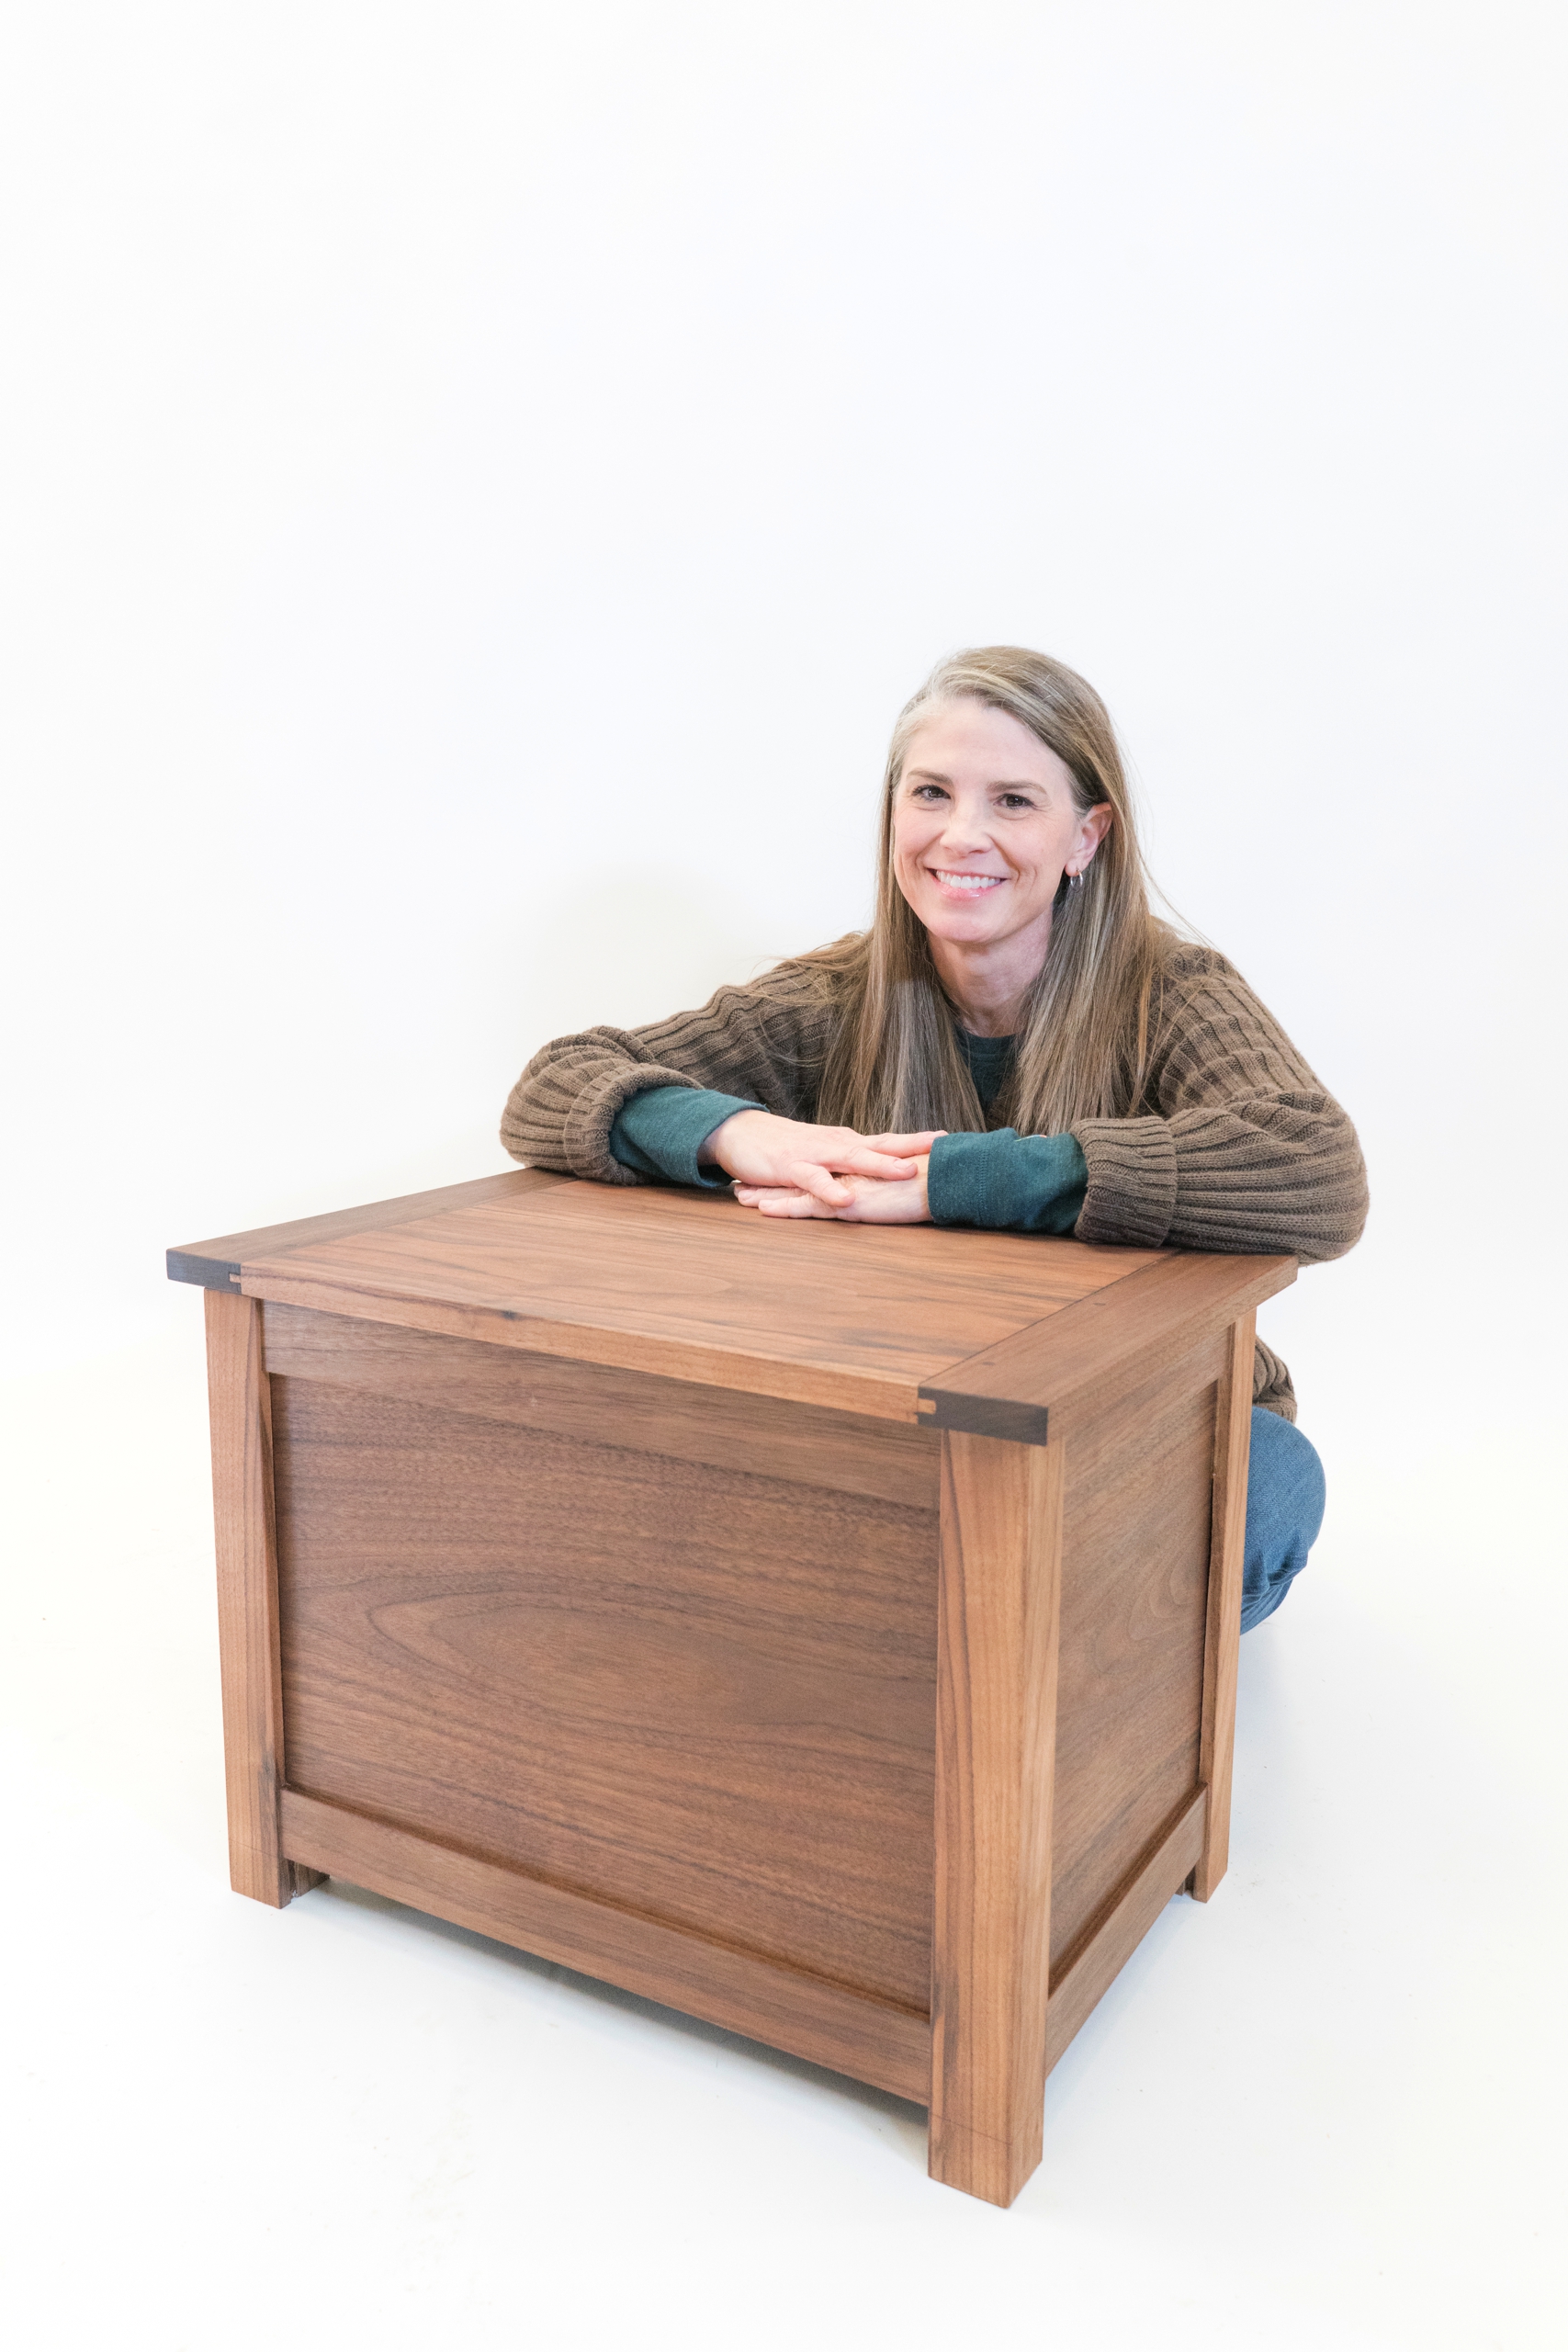 Dawn LeRoy, Graduate of Foundations of Woodworking, fall 2018